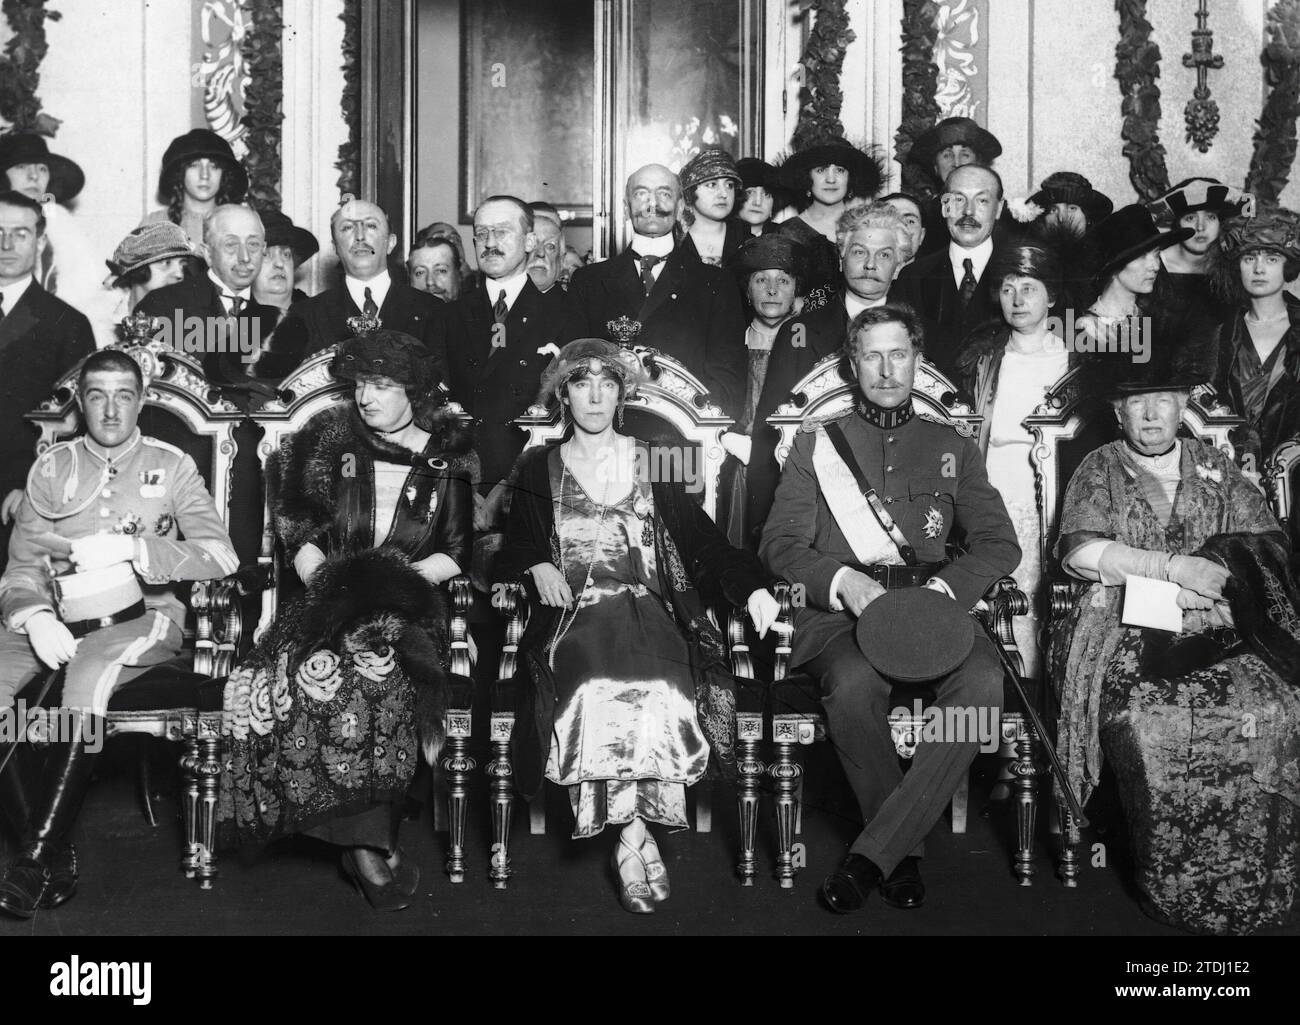 02/02/1921. Madrid. In the city Hall. H.H. Mm. the Kings of Belgium (1 and 2), with Ss. Ah. the Infantas Doña Isabel (3), Doña Luisa (4) and the Infante D. Alfonso (5), at the reception held yesterday in honor of the Belgian Sovereigns. Credit: Album / Archivo ABC Stock Photo